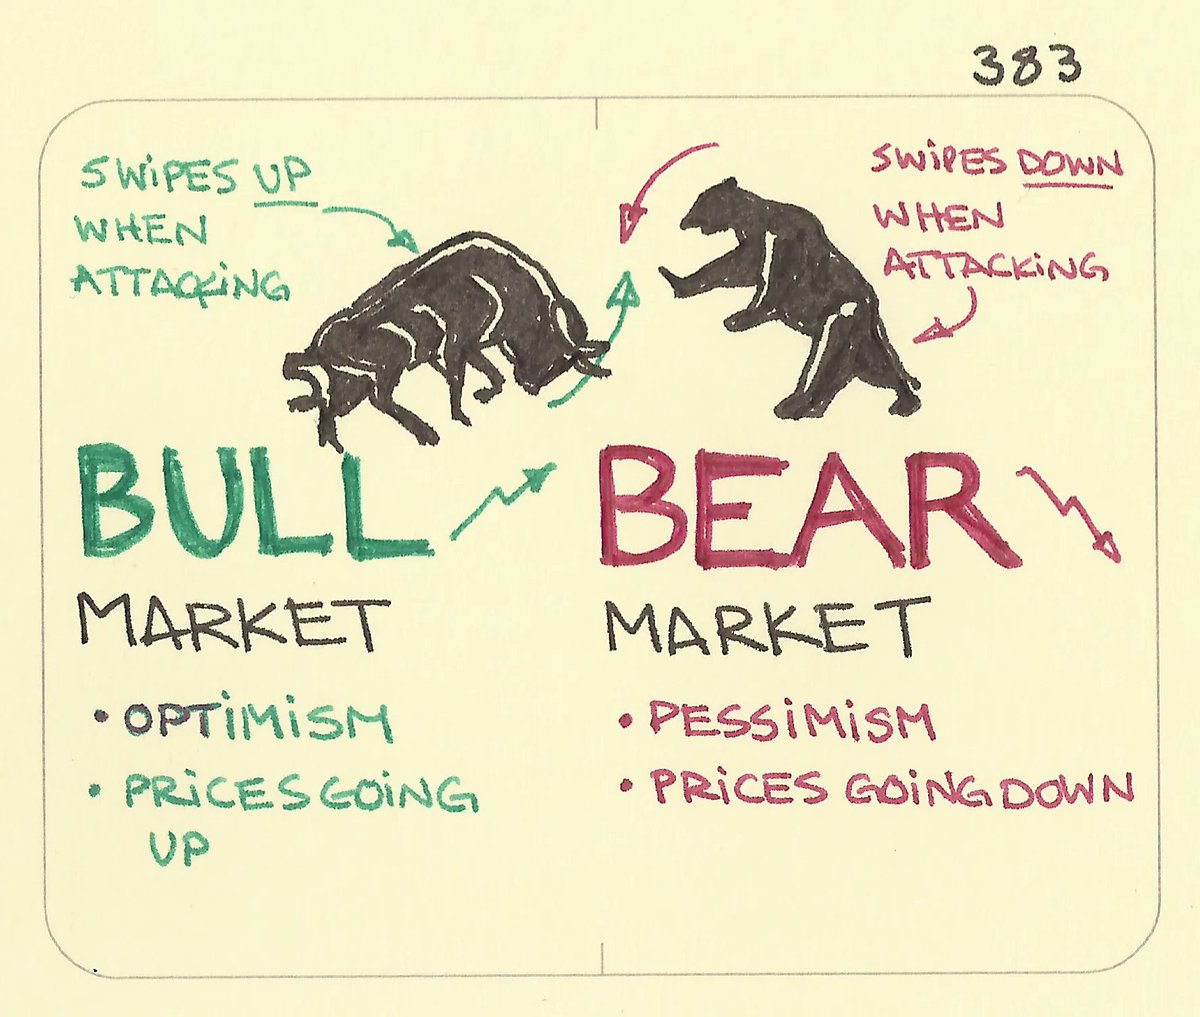 Bull market, bear market I could never remember which was which and here is the way to remember it: when bulls attack they swipe up, and when bears attack they swipe down — just like their respective markets. #animals #finance #investing